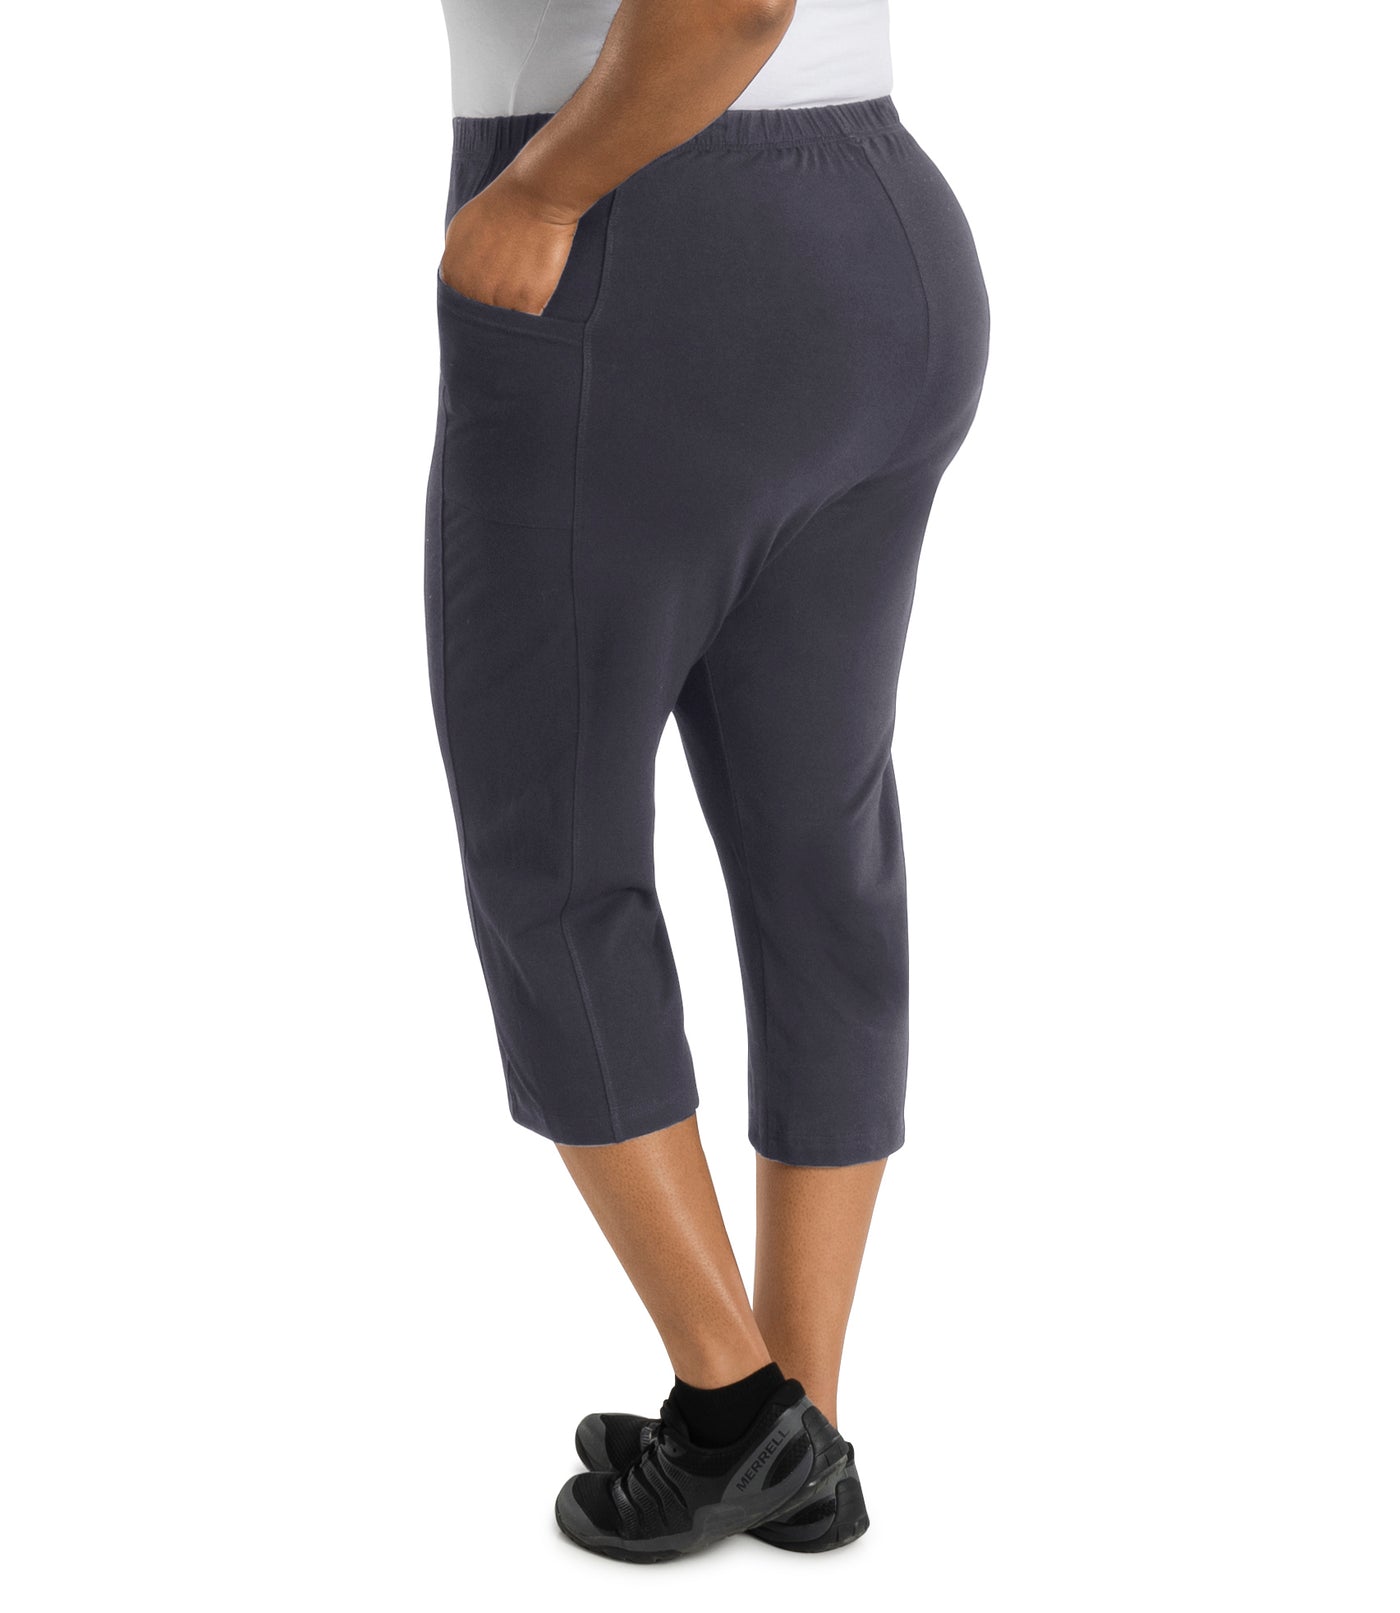 Plus size woman facing towards back, left hand in pocket, wearing JunoActive Stretch Naturals side pocket plus size capri pant bottom. The hemline comes to mid-calf and hugs the body without being skin tight. Color is oak gray.